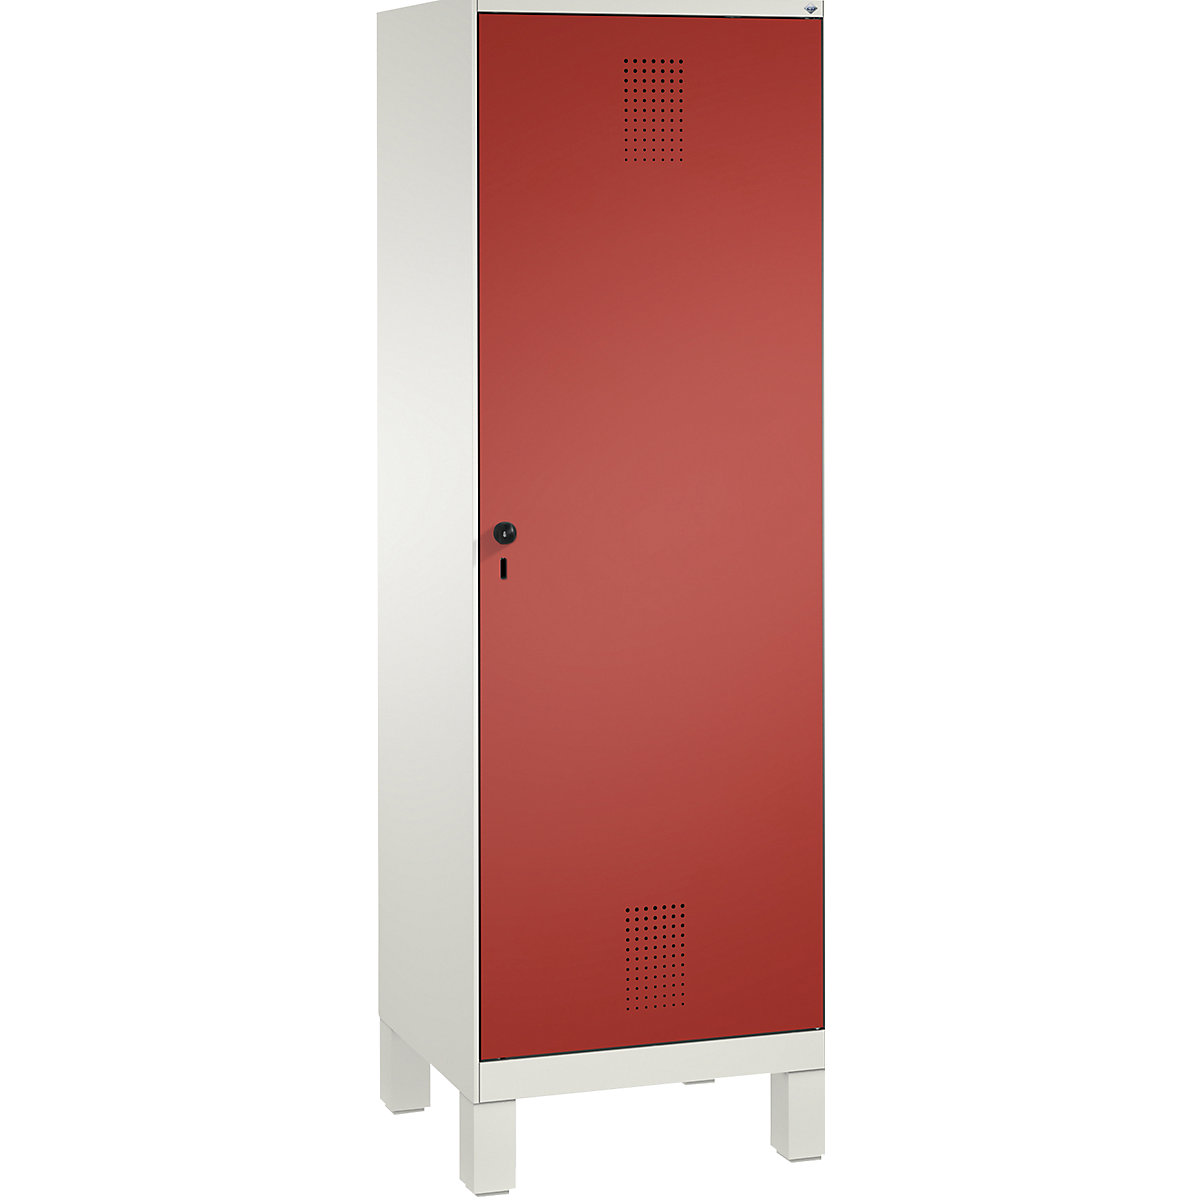 EVOLO cloakroom locker, door for 2 compartments, with feet – C+P, 2 compartments, 1 door, compartment width 300 mm, traffic white / flame red-7